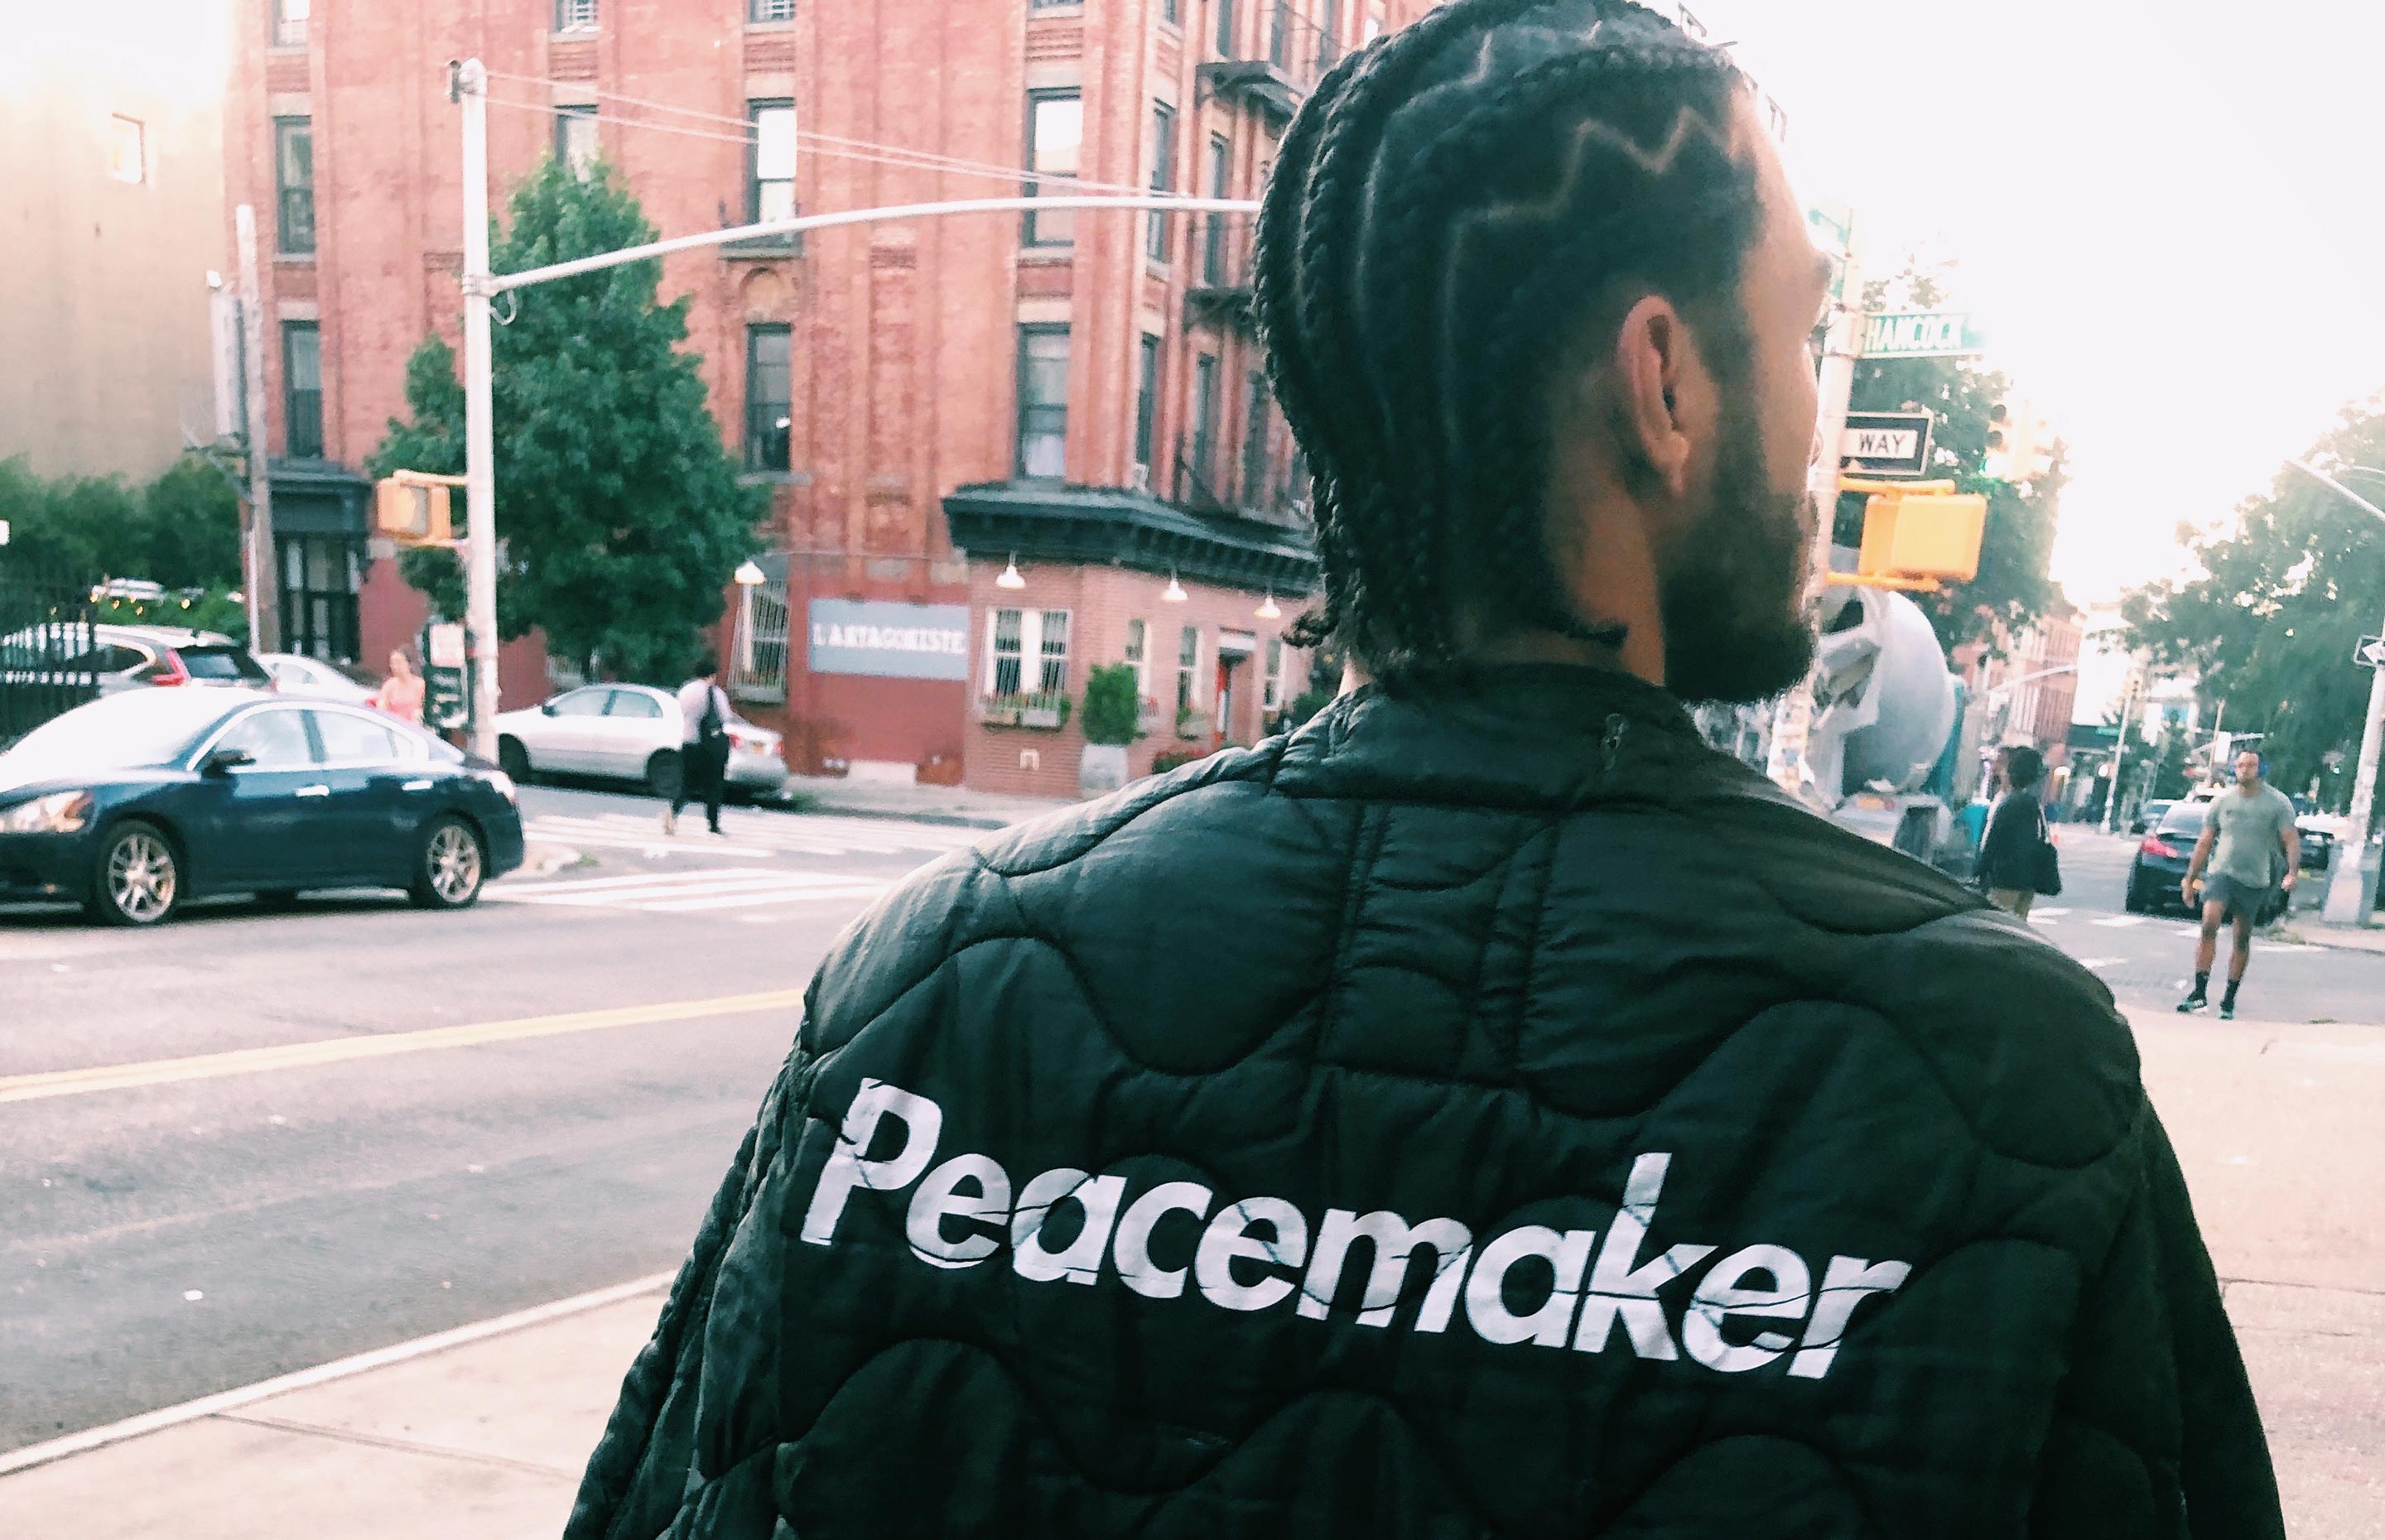 SUPREME x OAMC PEACEMAKER image project page